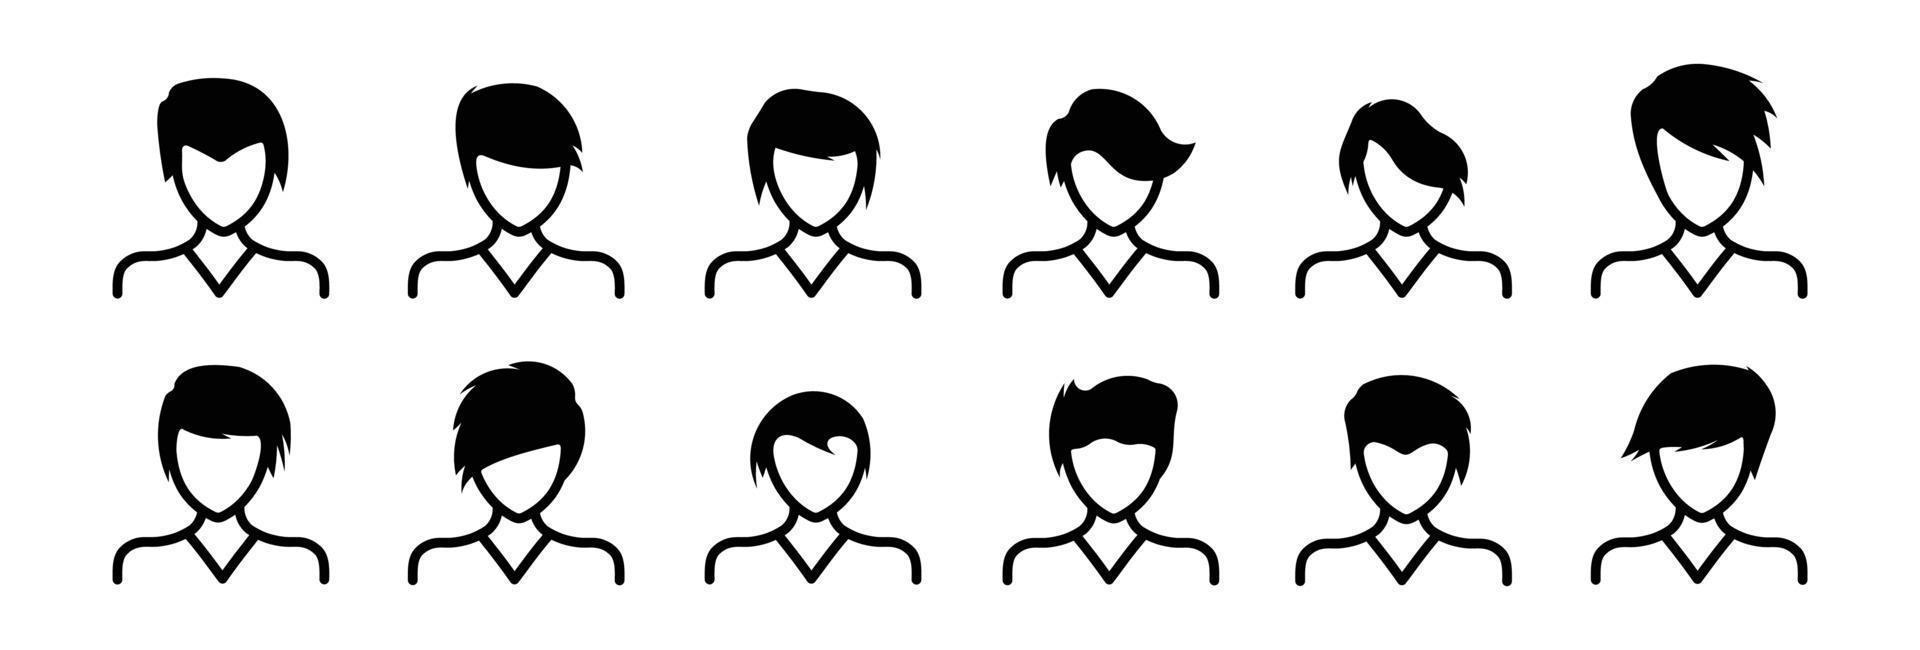 People avatar icon set men hair style,Vector flat  icon as male illustration design vector